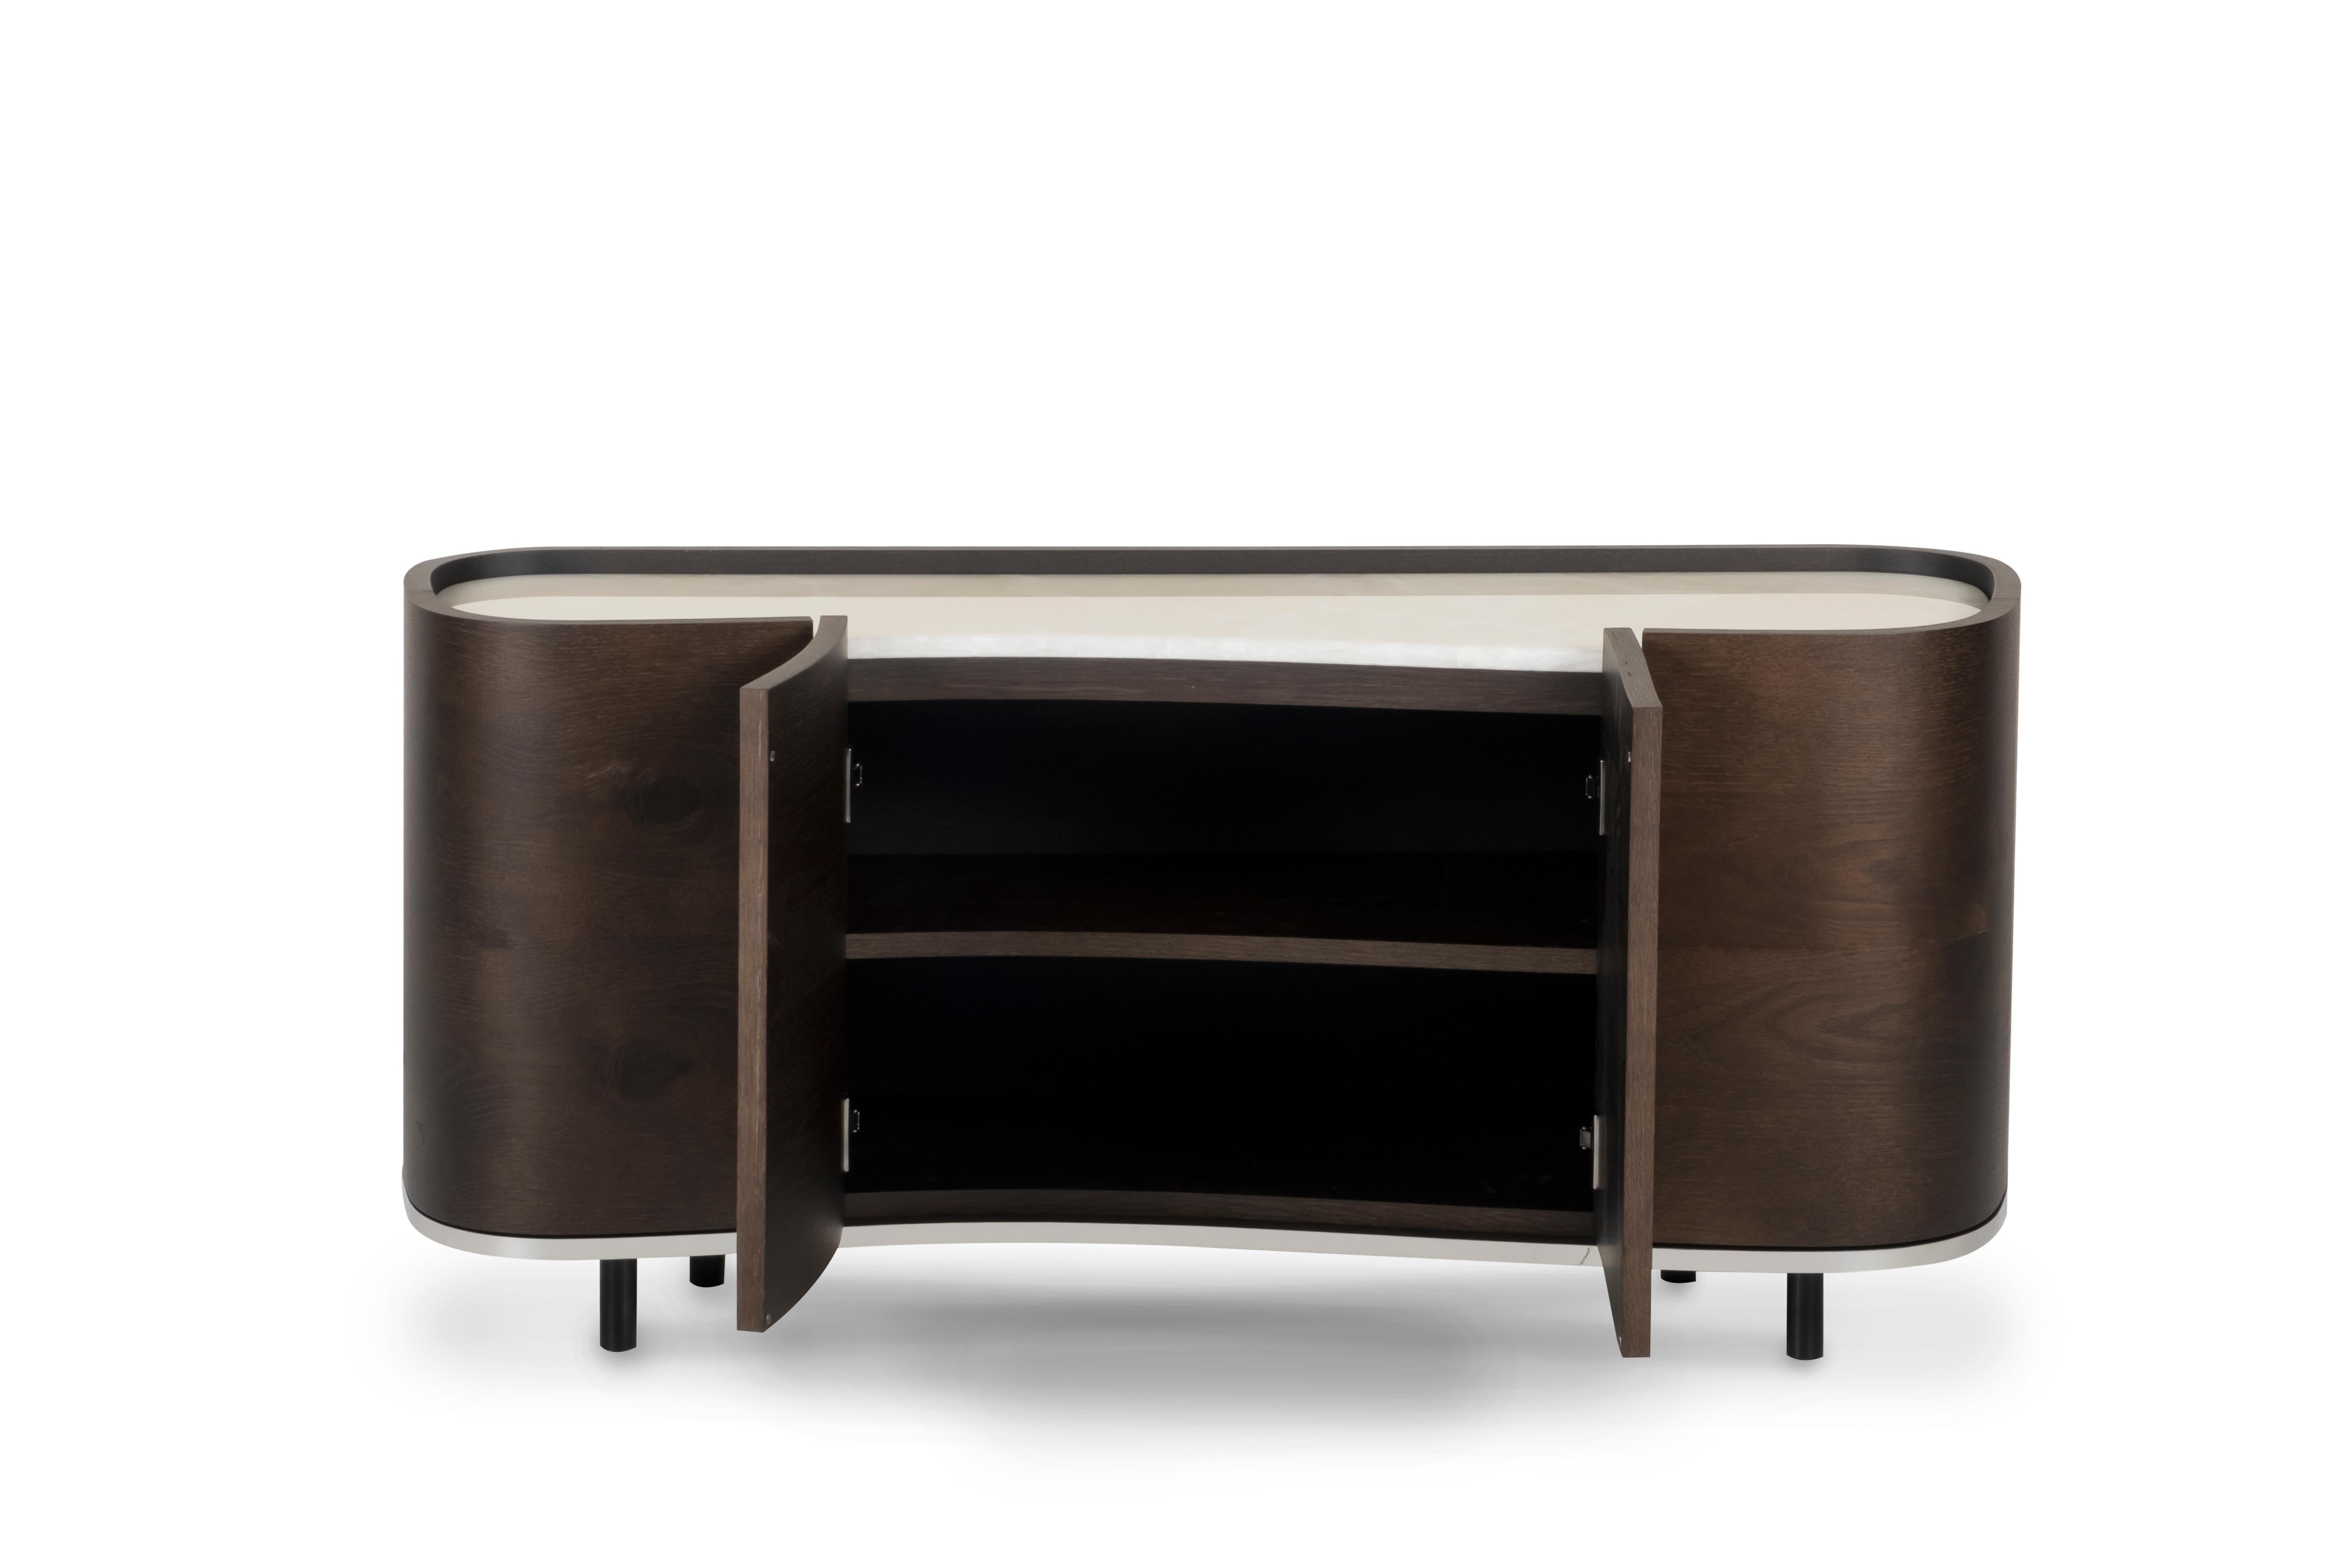 Organ Sideboard, Modern Collection, Handcrafted in Portugal - Europe by Greenapple.

An elegant sideboard in dark brown Oak Root, the top made of polished White Onyx attracts the attention of everyone who enters the room. The dark and light tones